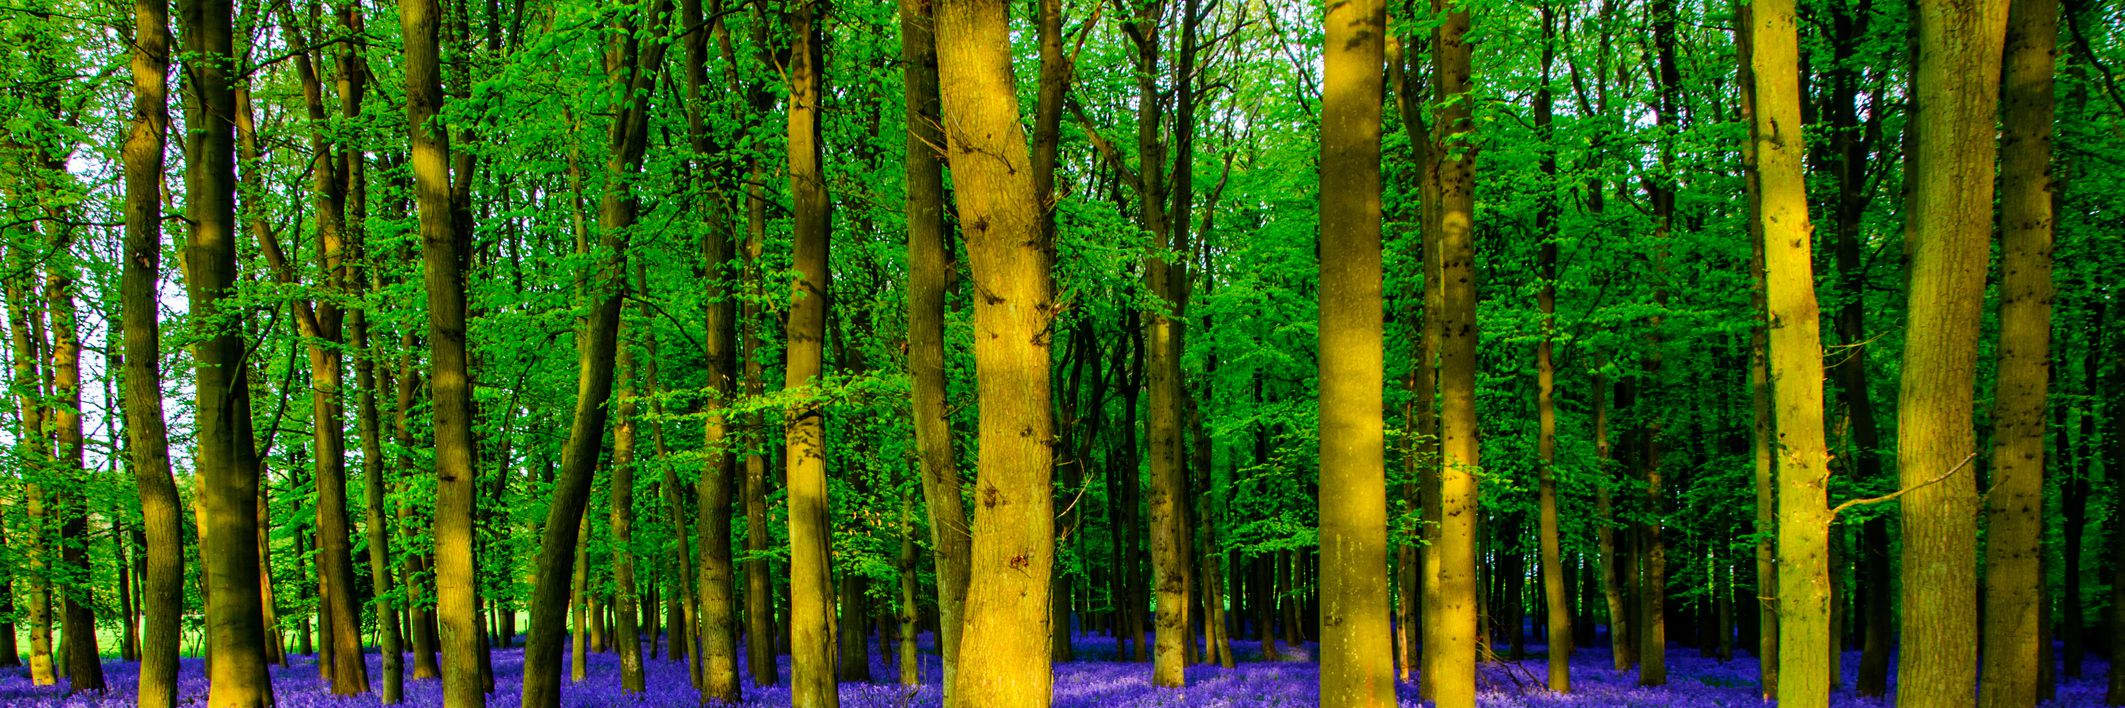 Bluebell Wood, County Roscommon